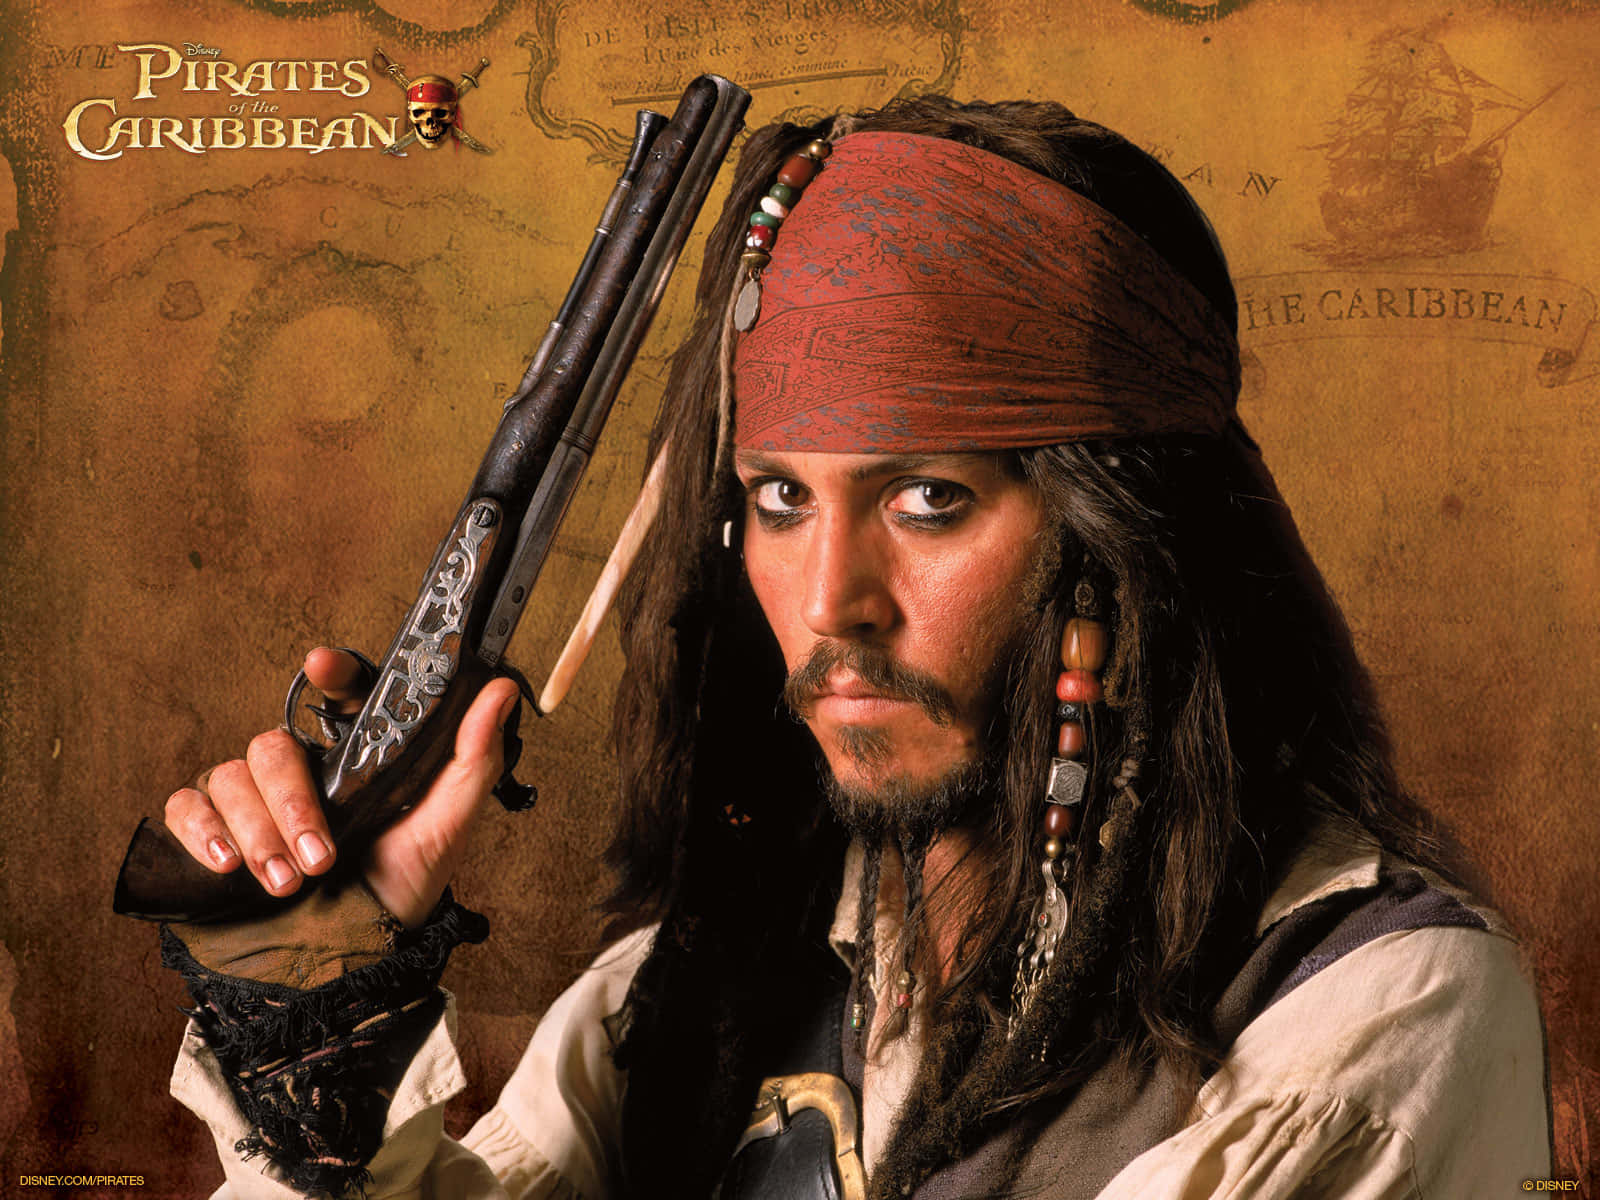 Exciting Adventure with Captain Jack Sparrow